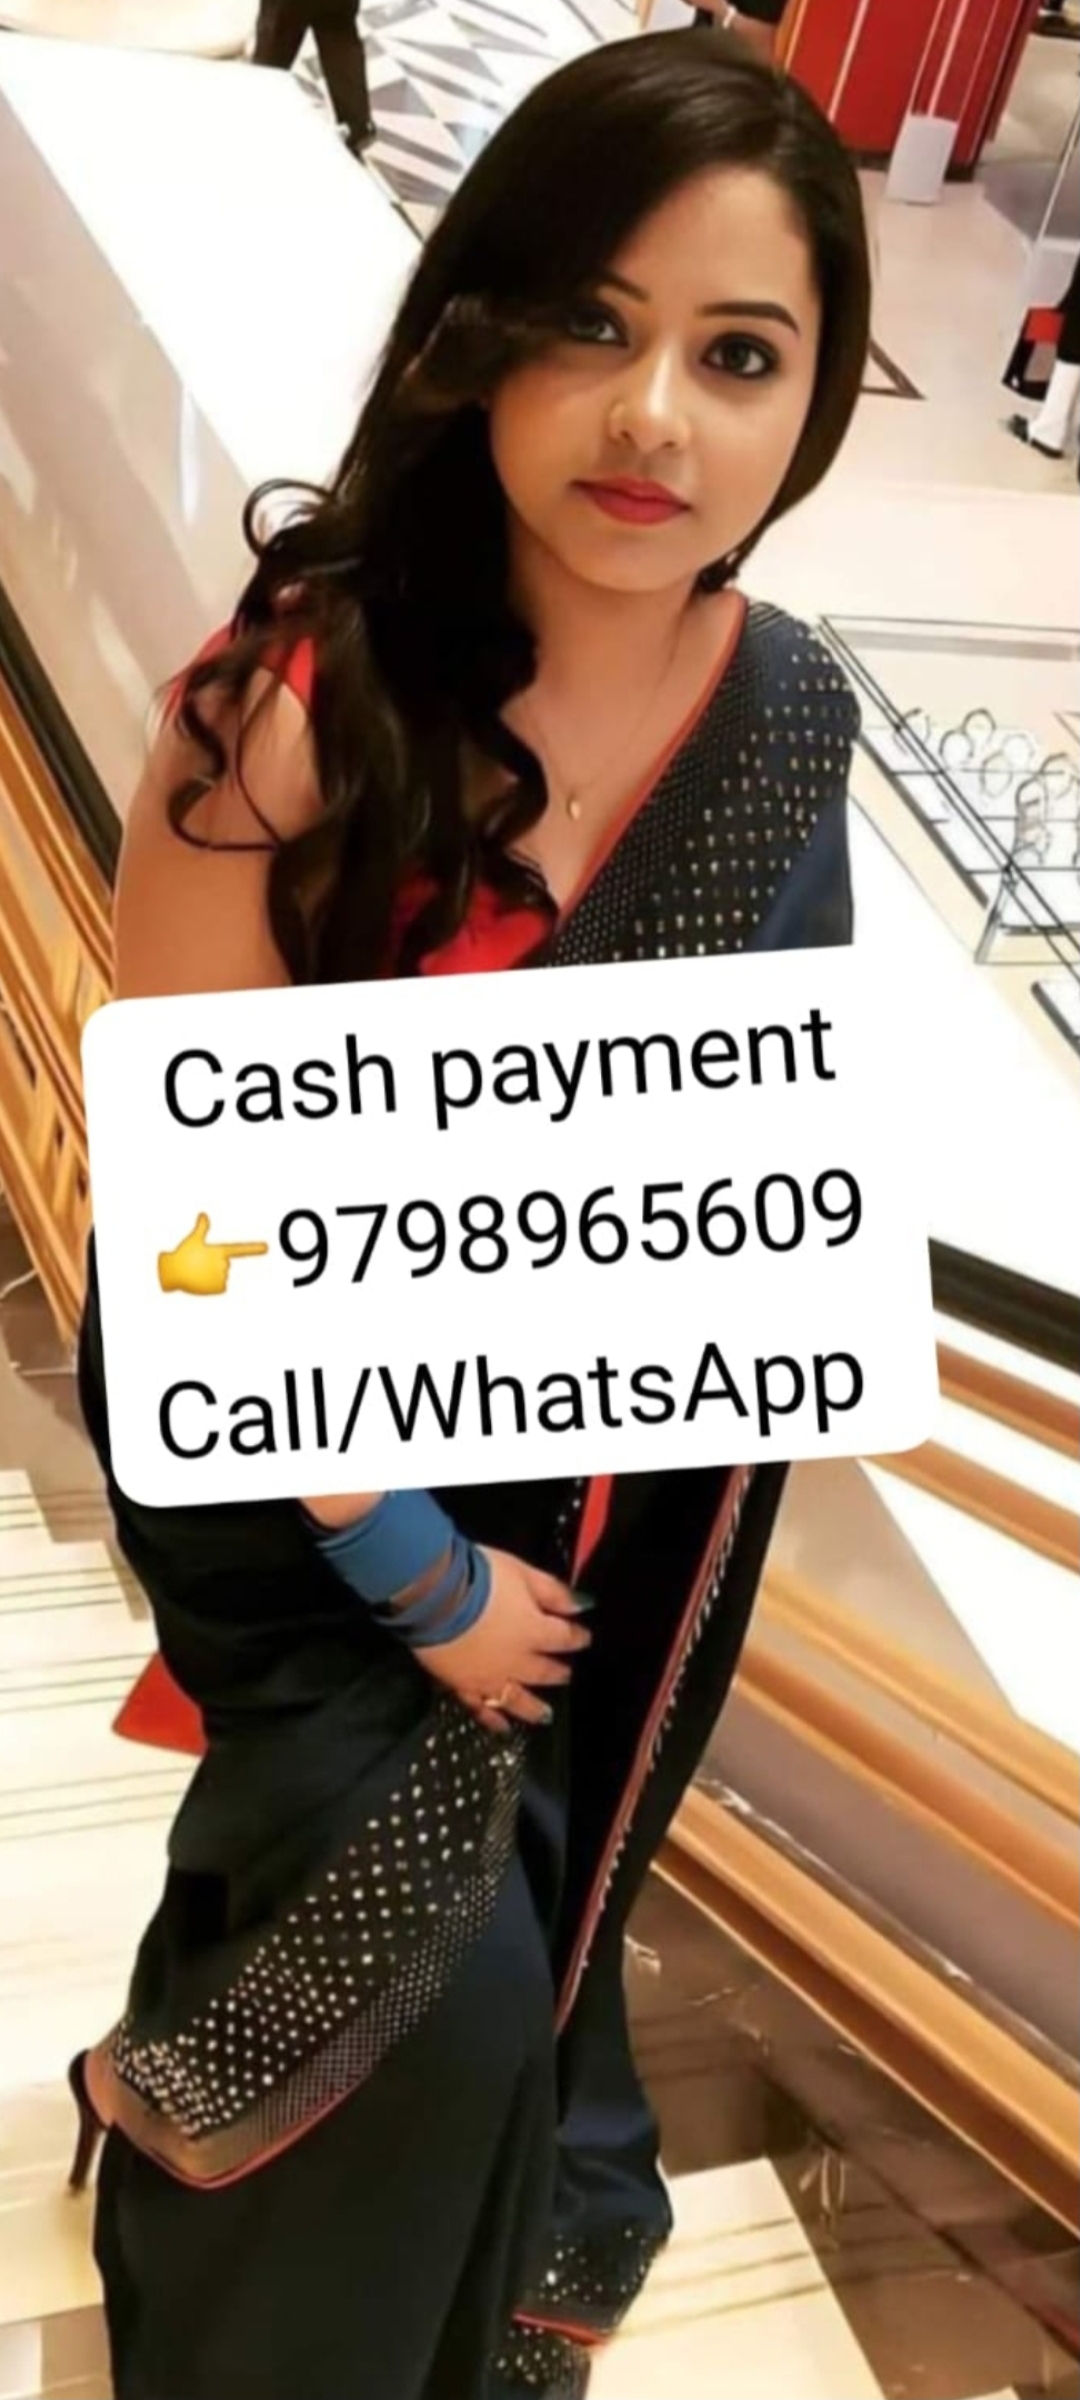 Barrackpore in VIP model college girl anytime available service 